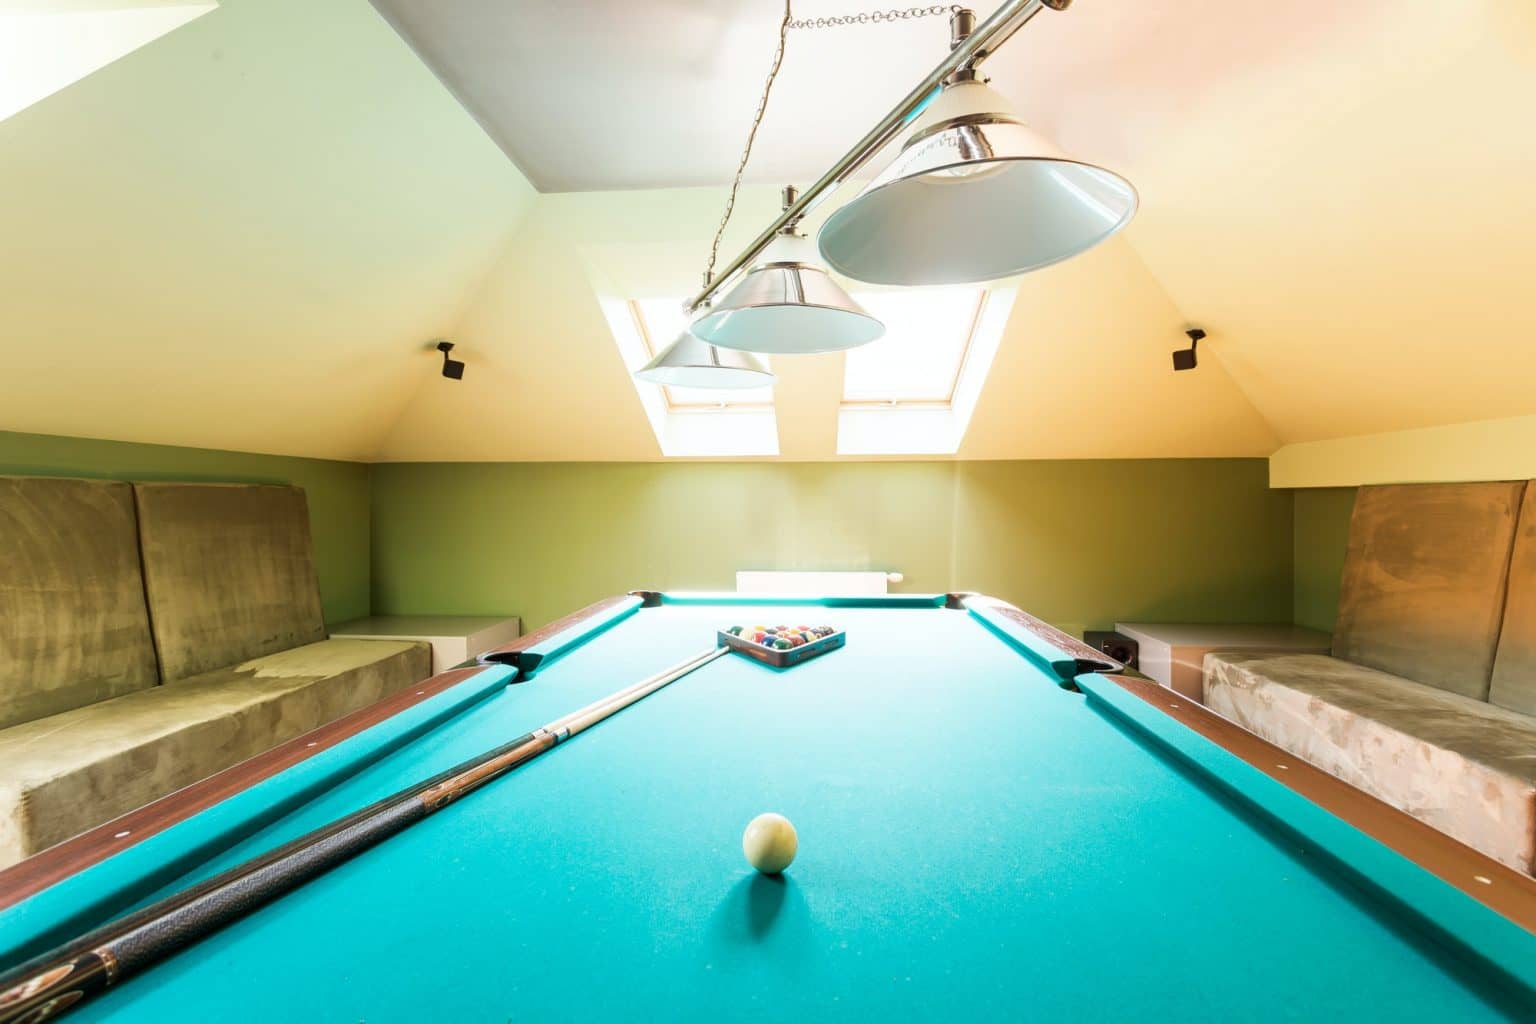 Entertainment loft room with a pool table in New Houghton